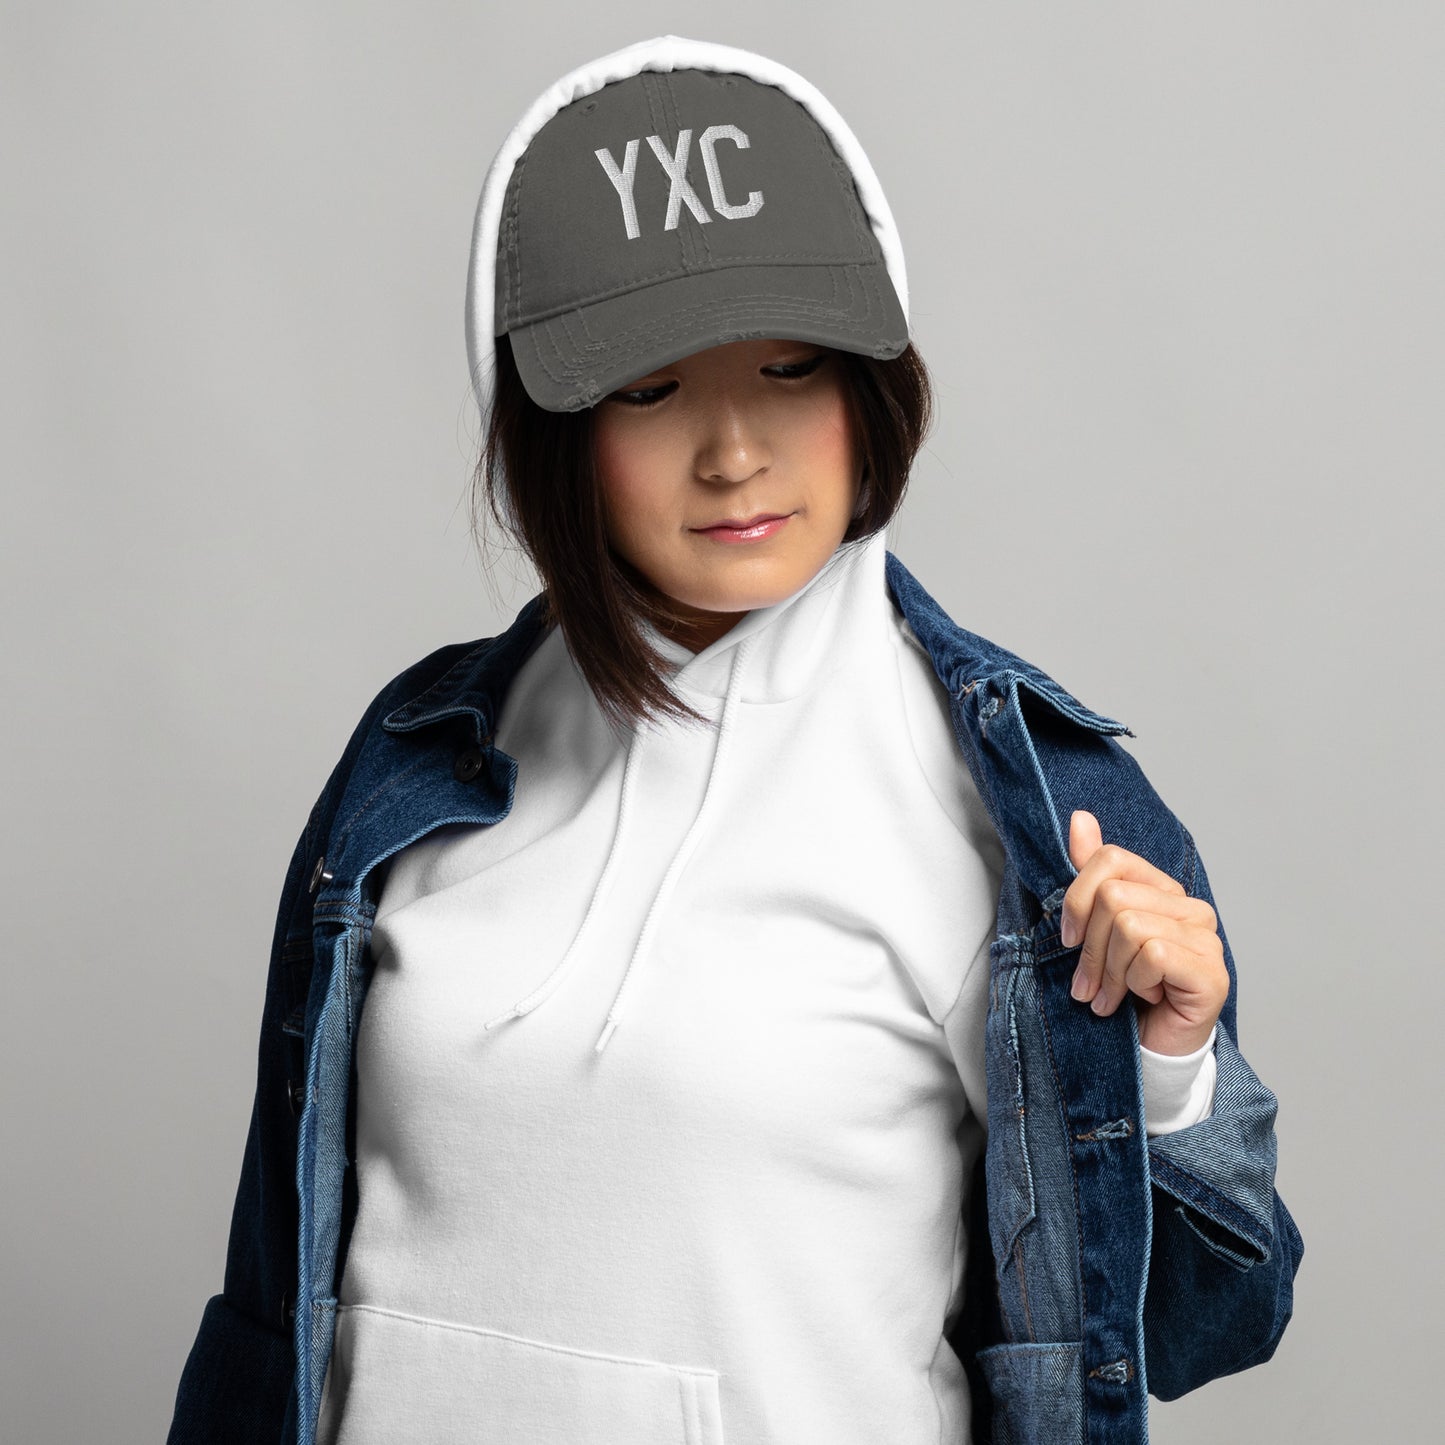 Airport Code Distressed Hat - White • YXC Cranbrook • YHM Designs - Image 06